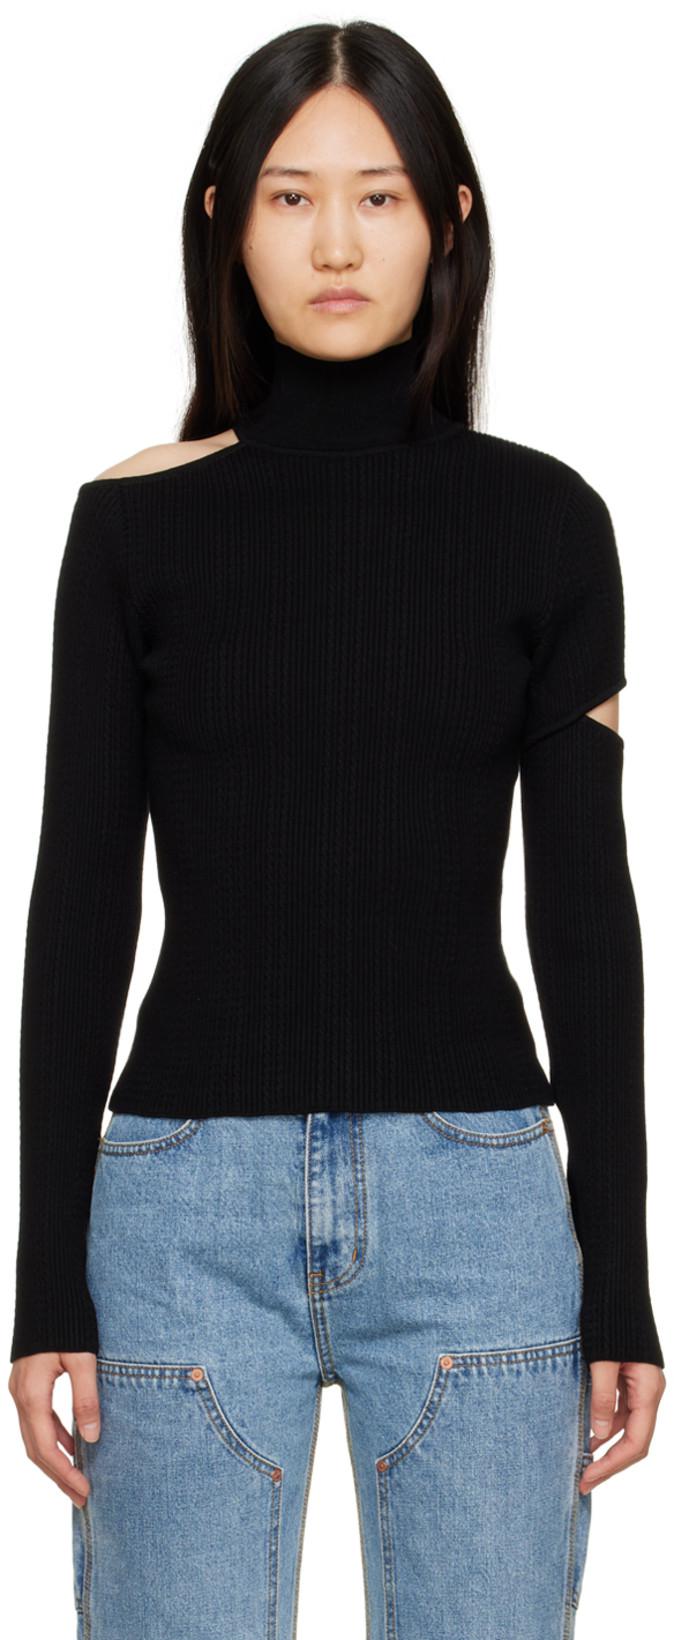 SSENSE Exclusive Black Jessica Turtleneck by ANDERSSON BELL